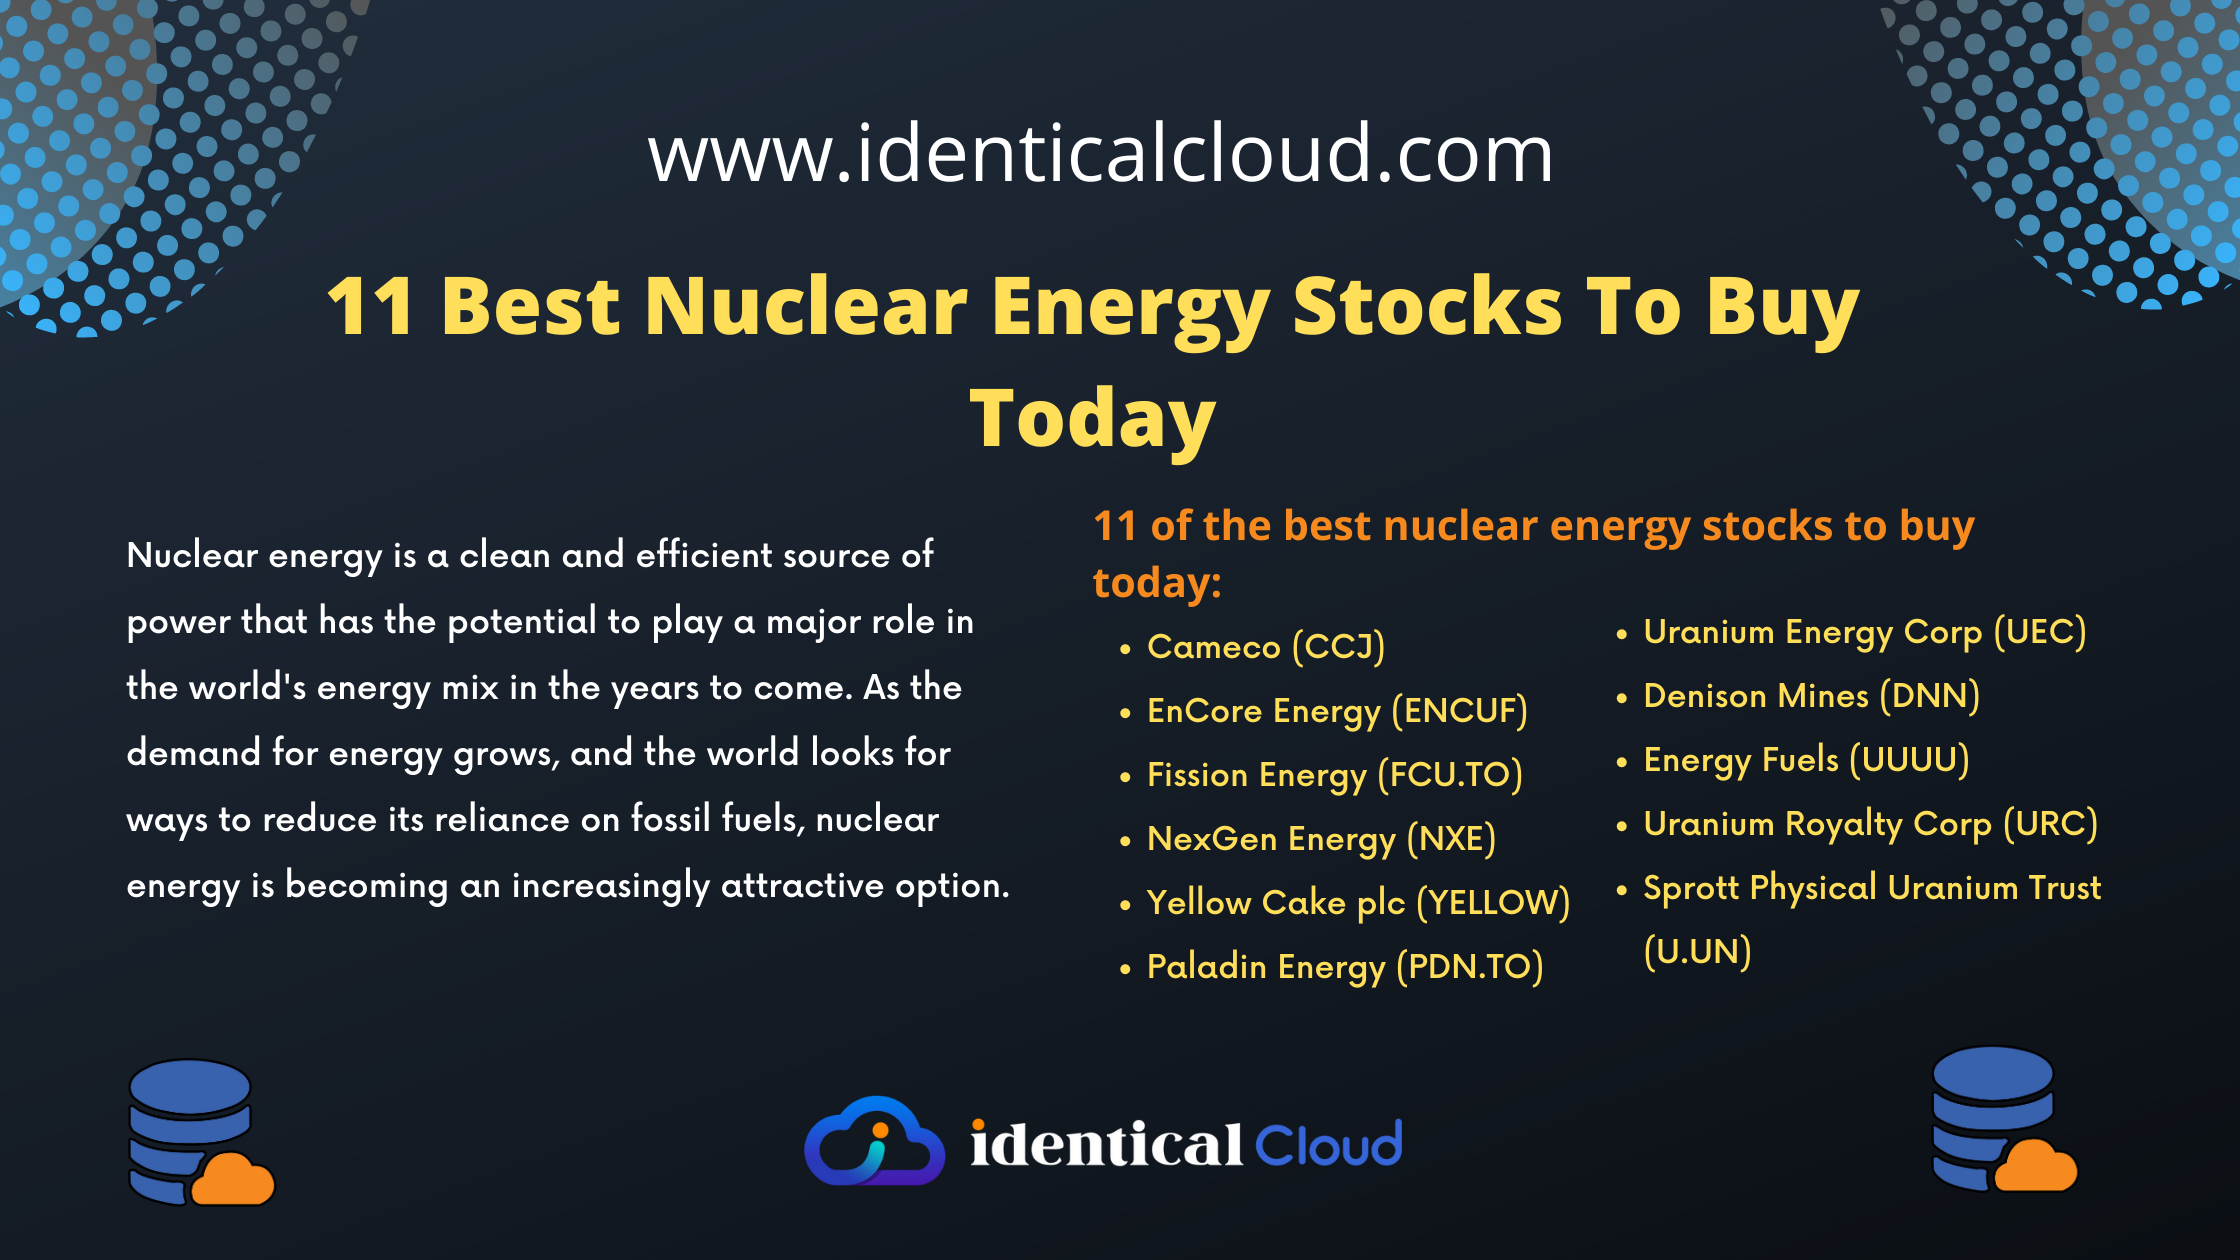 11 Best Nuclear Energy Stocks To Buy Today - identicalcloud.com